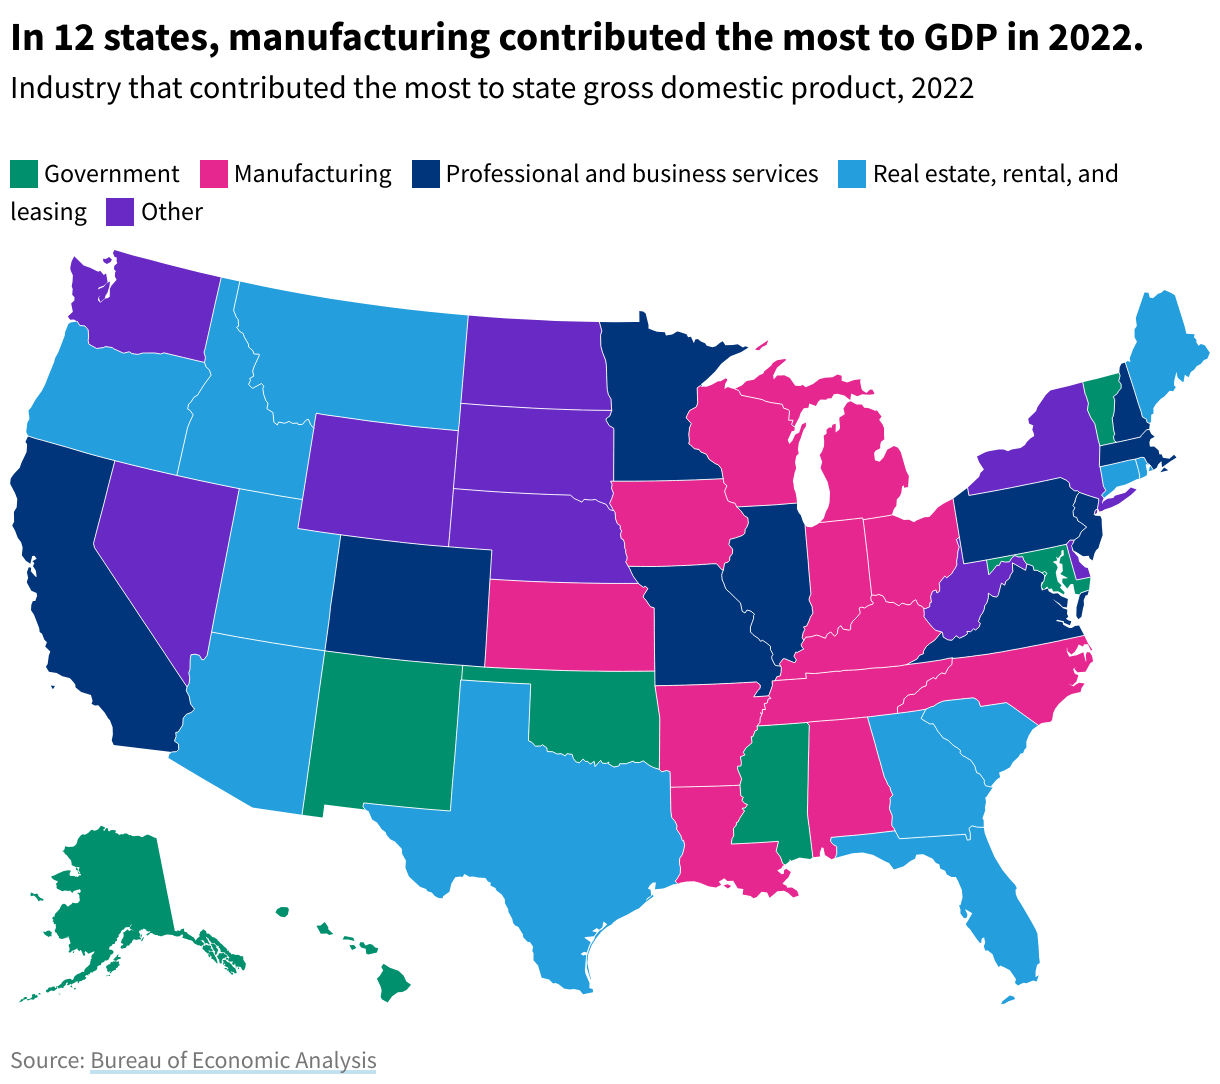 Map of the United States showing industries that contributed most to state GDP in 2022. In 12 states, manufacturing contributed the most to state GDP. 